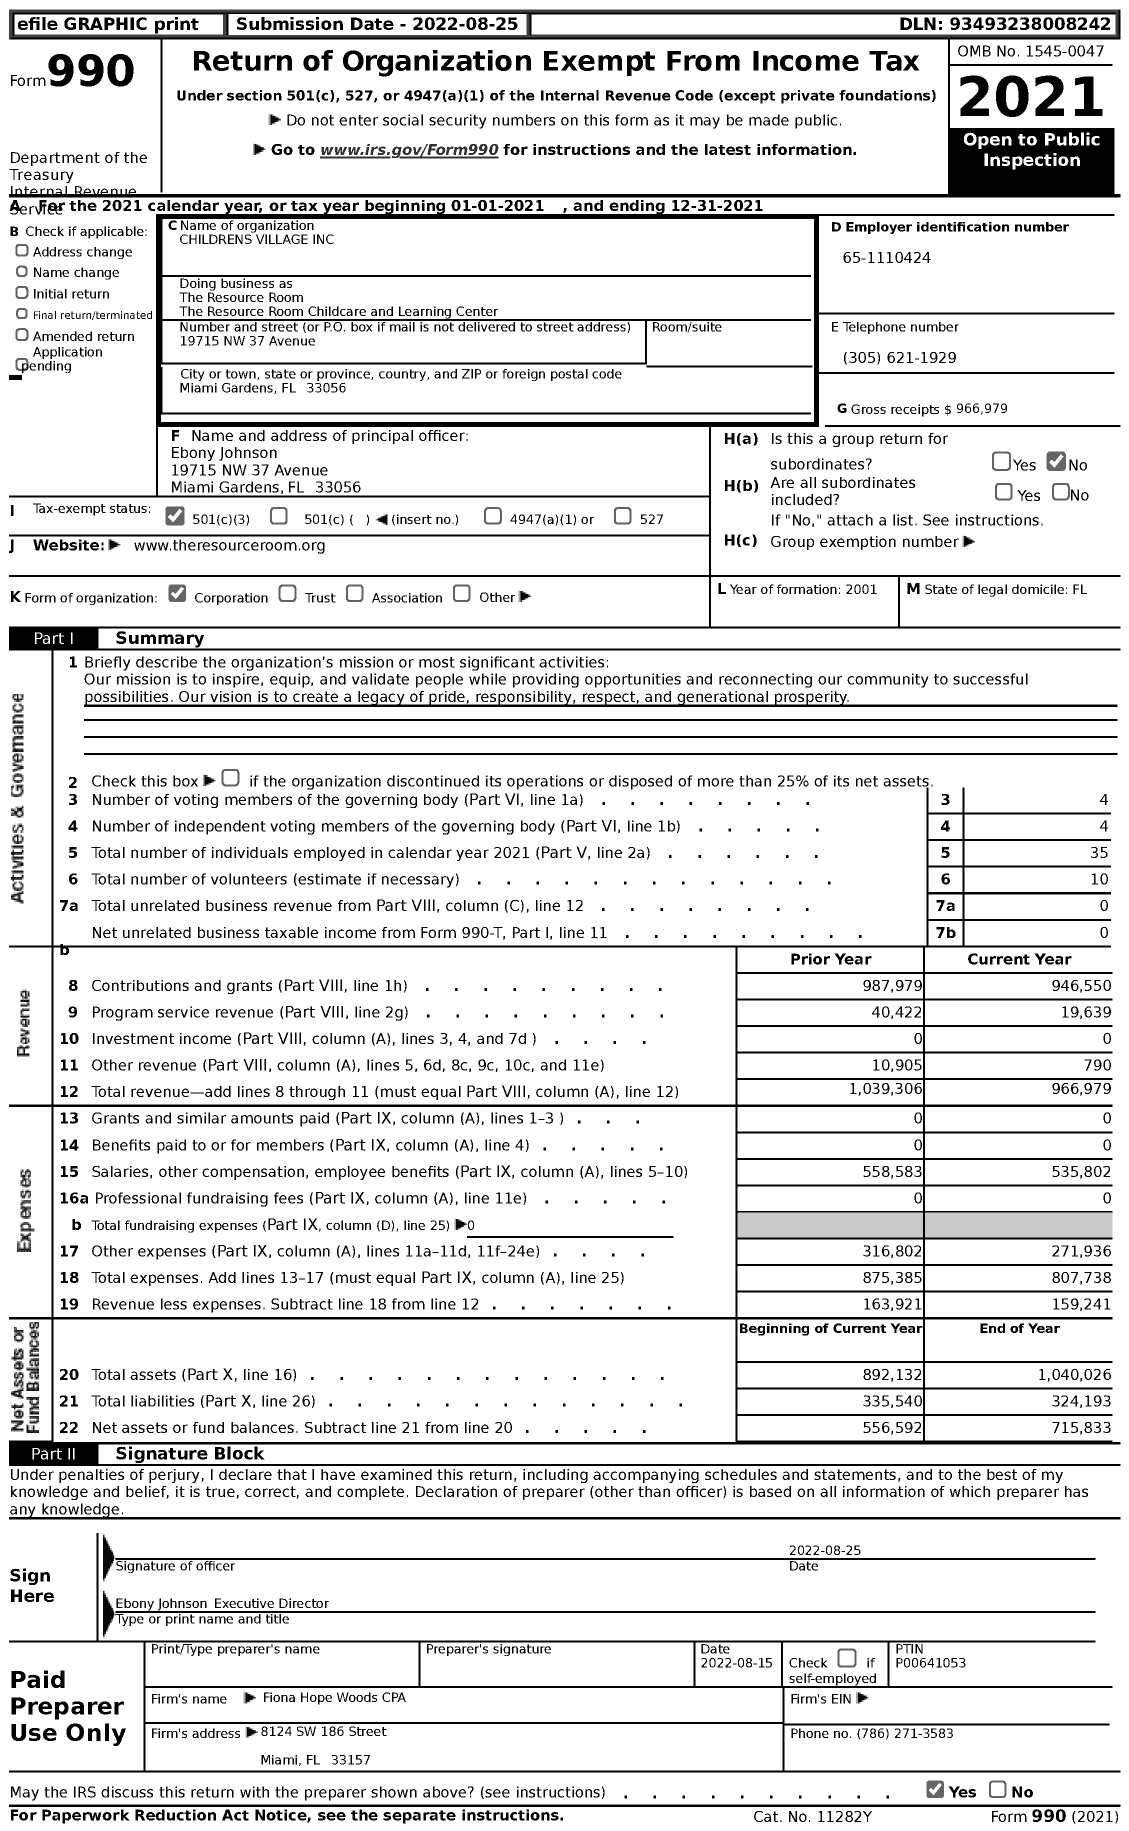 Image of first page of 2021 Form 990 for The Resource Room The Resource Room Childcare and Learning Center